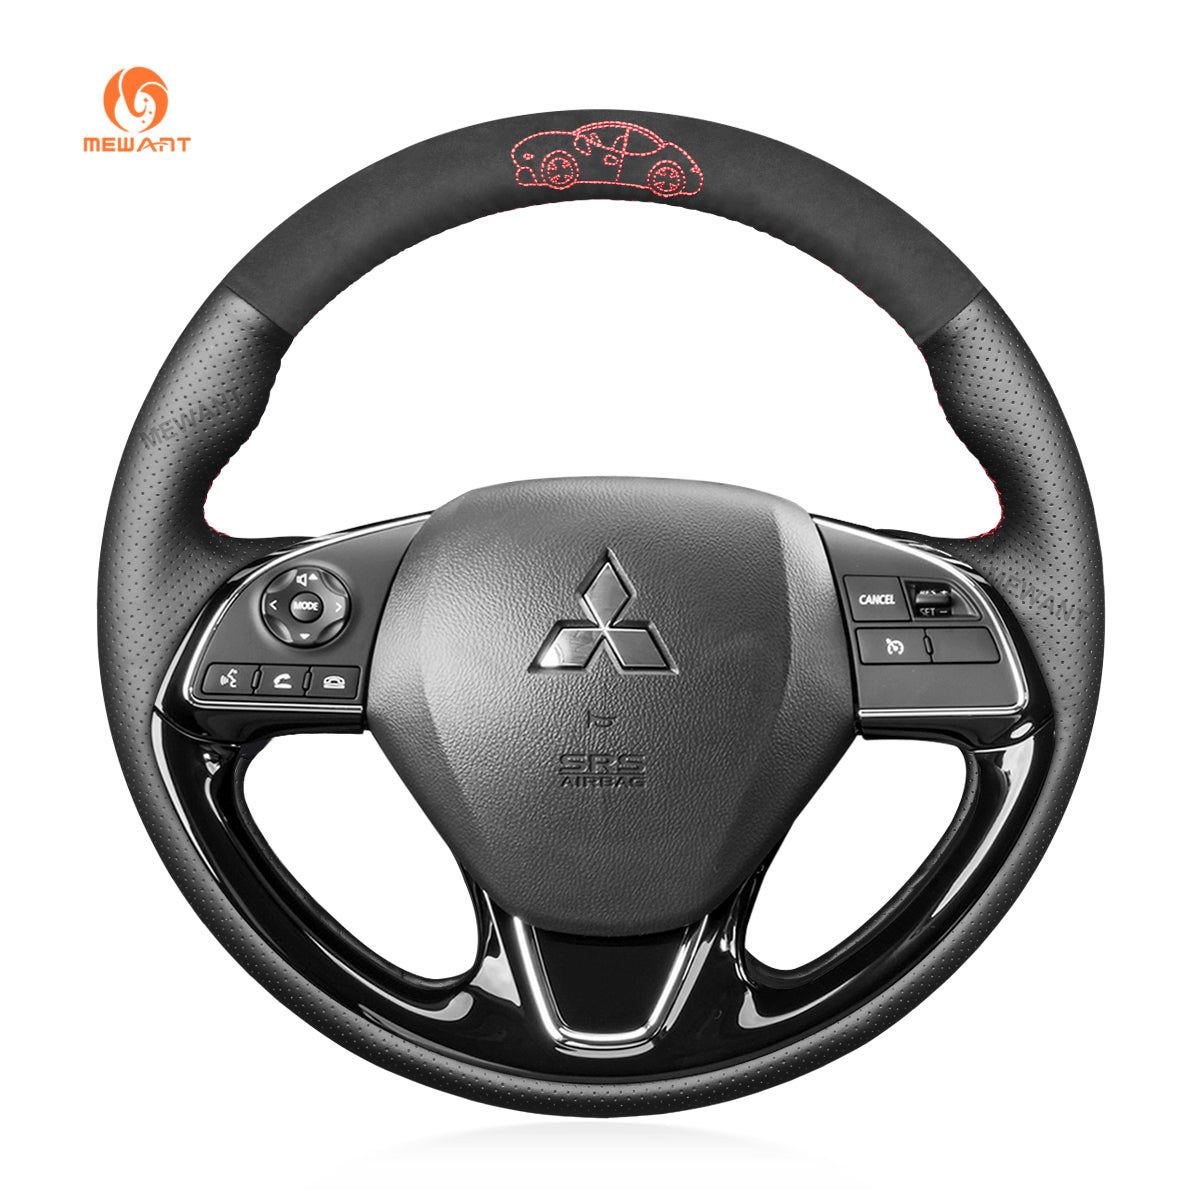 MEWANT Genuine Leather Suede with Embroidery Car Steering Wheel Cover for Mitsubishi ASX Outlander Mirage Eclipse (Cross)